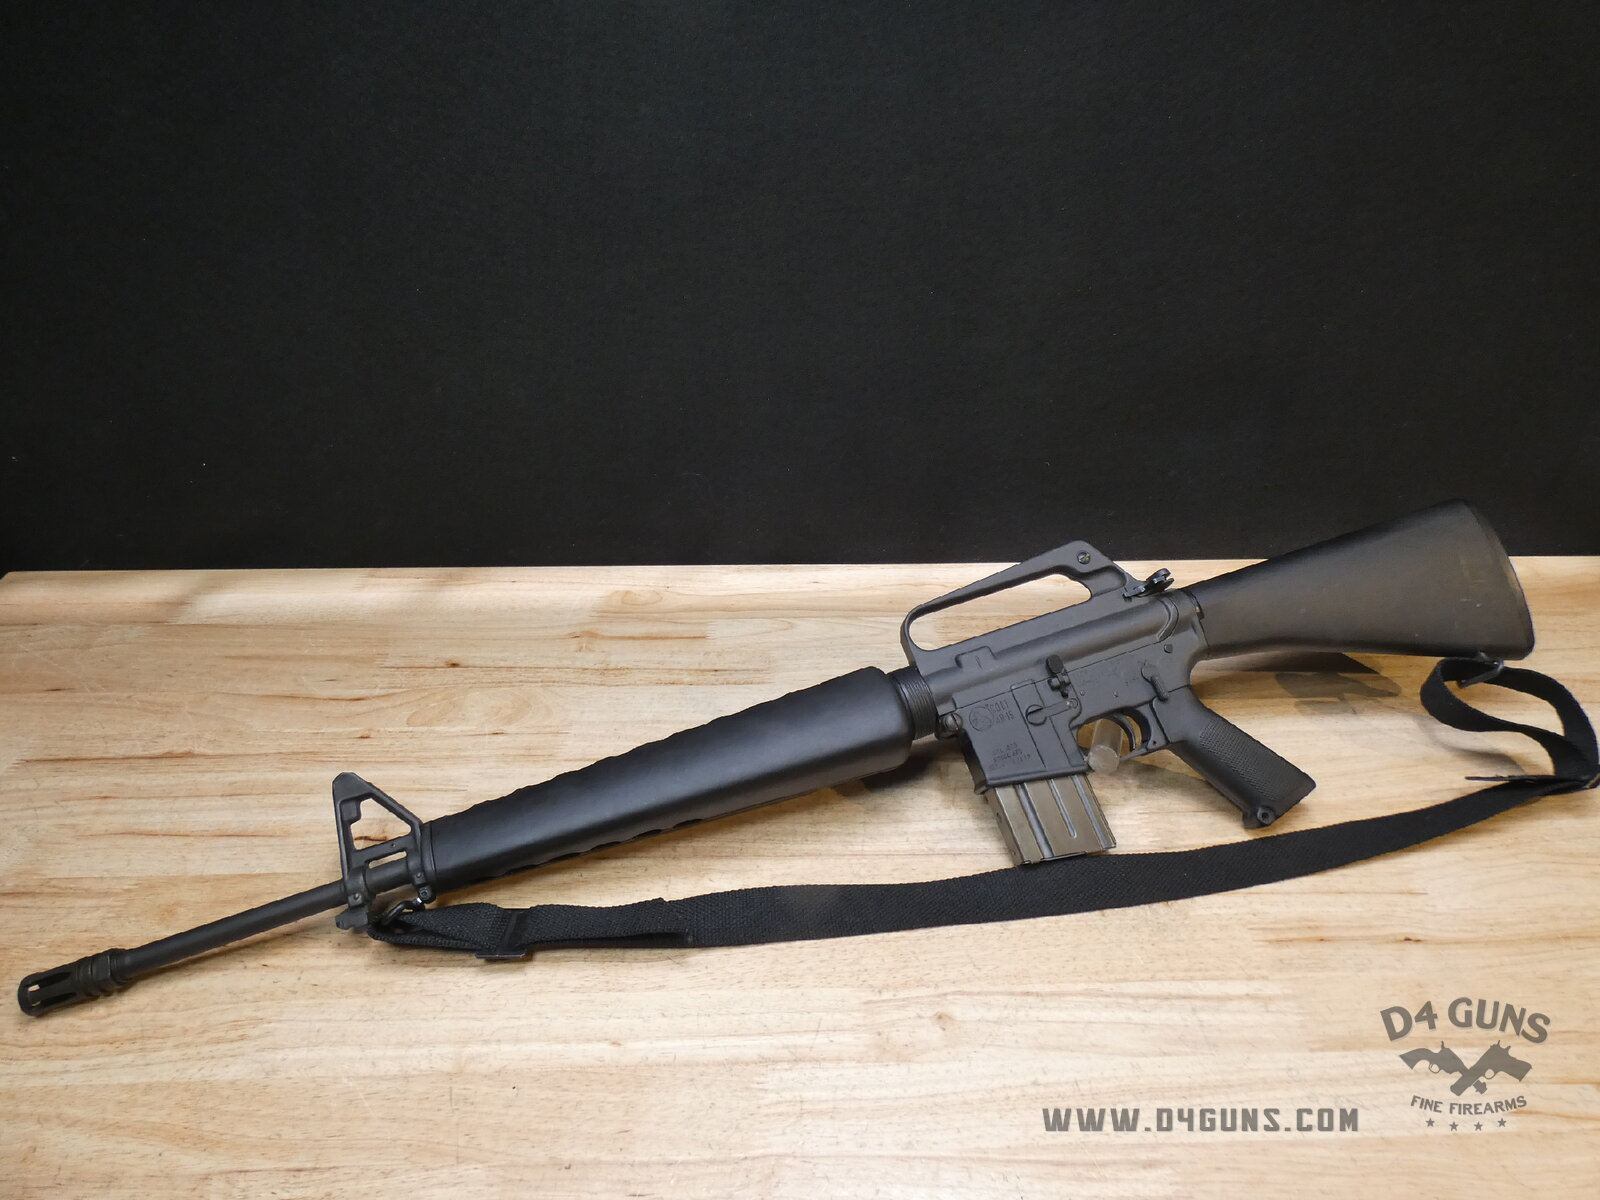 Colt Ar 15 Post Ban Serial Numbers